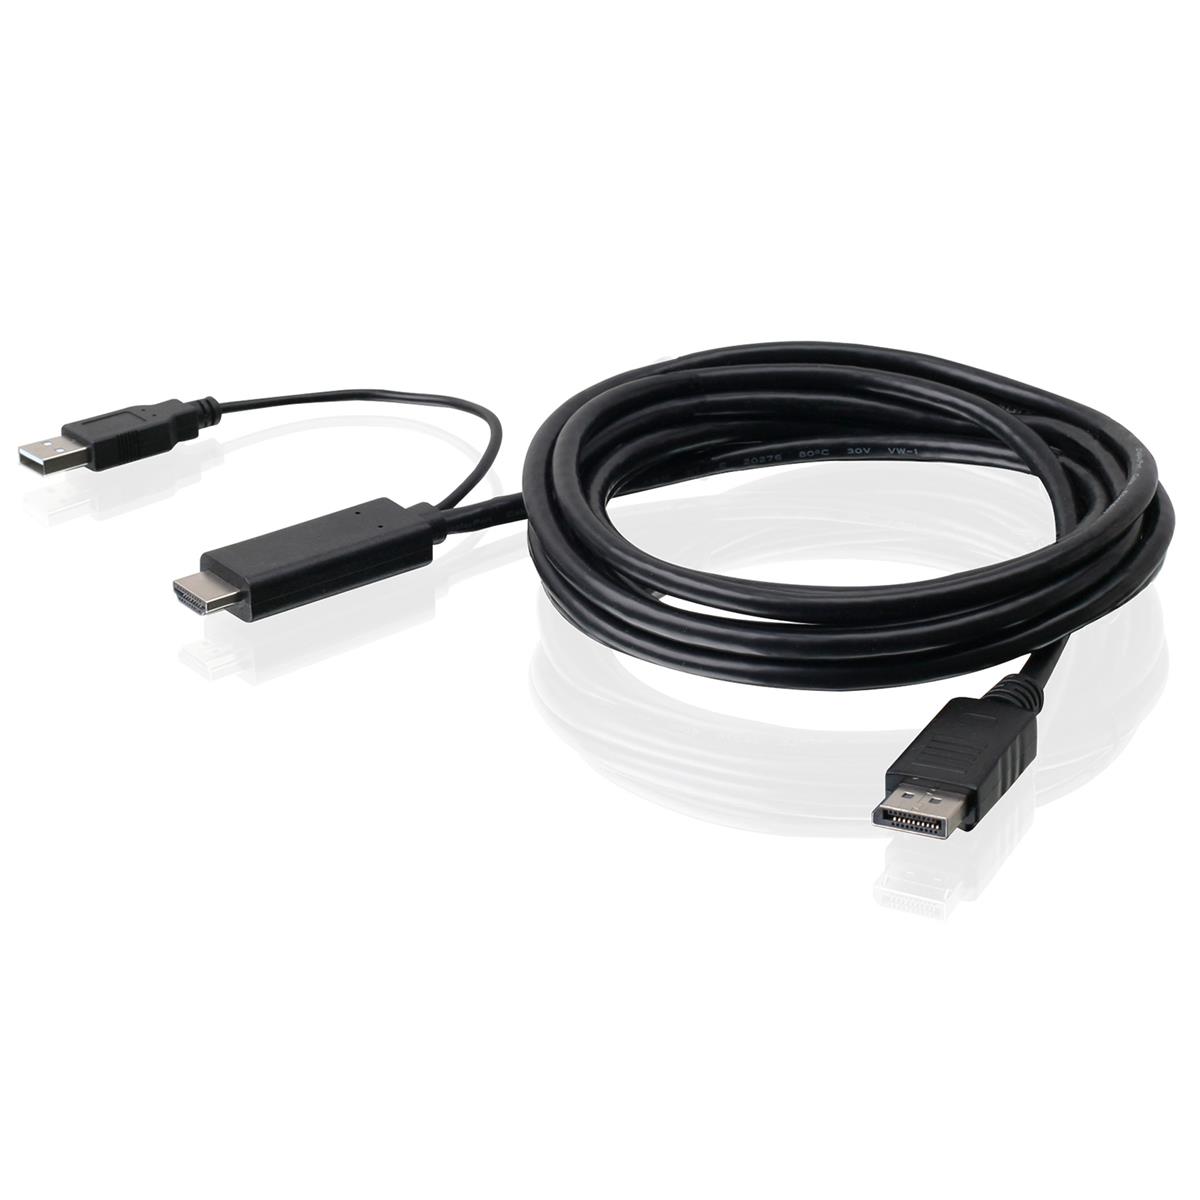 Photos - Cable (video, audio, USB) IOGEAR 6' Active HDMI to DisplayPort Cable G2LHDDP02 